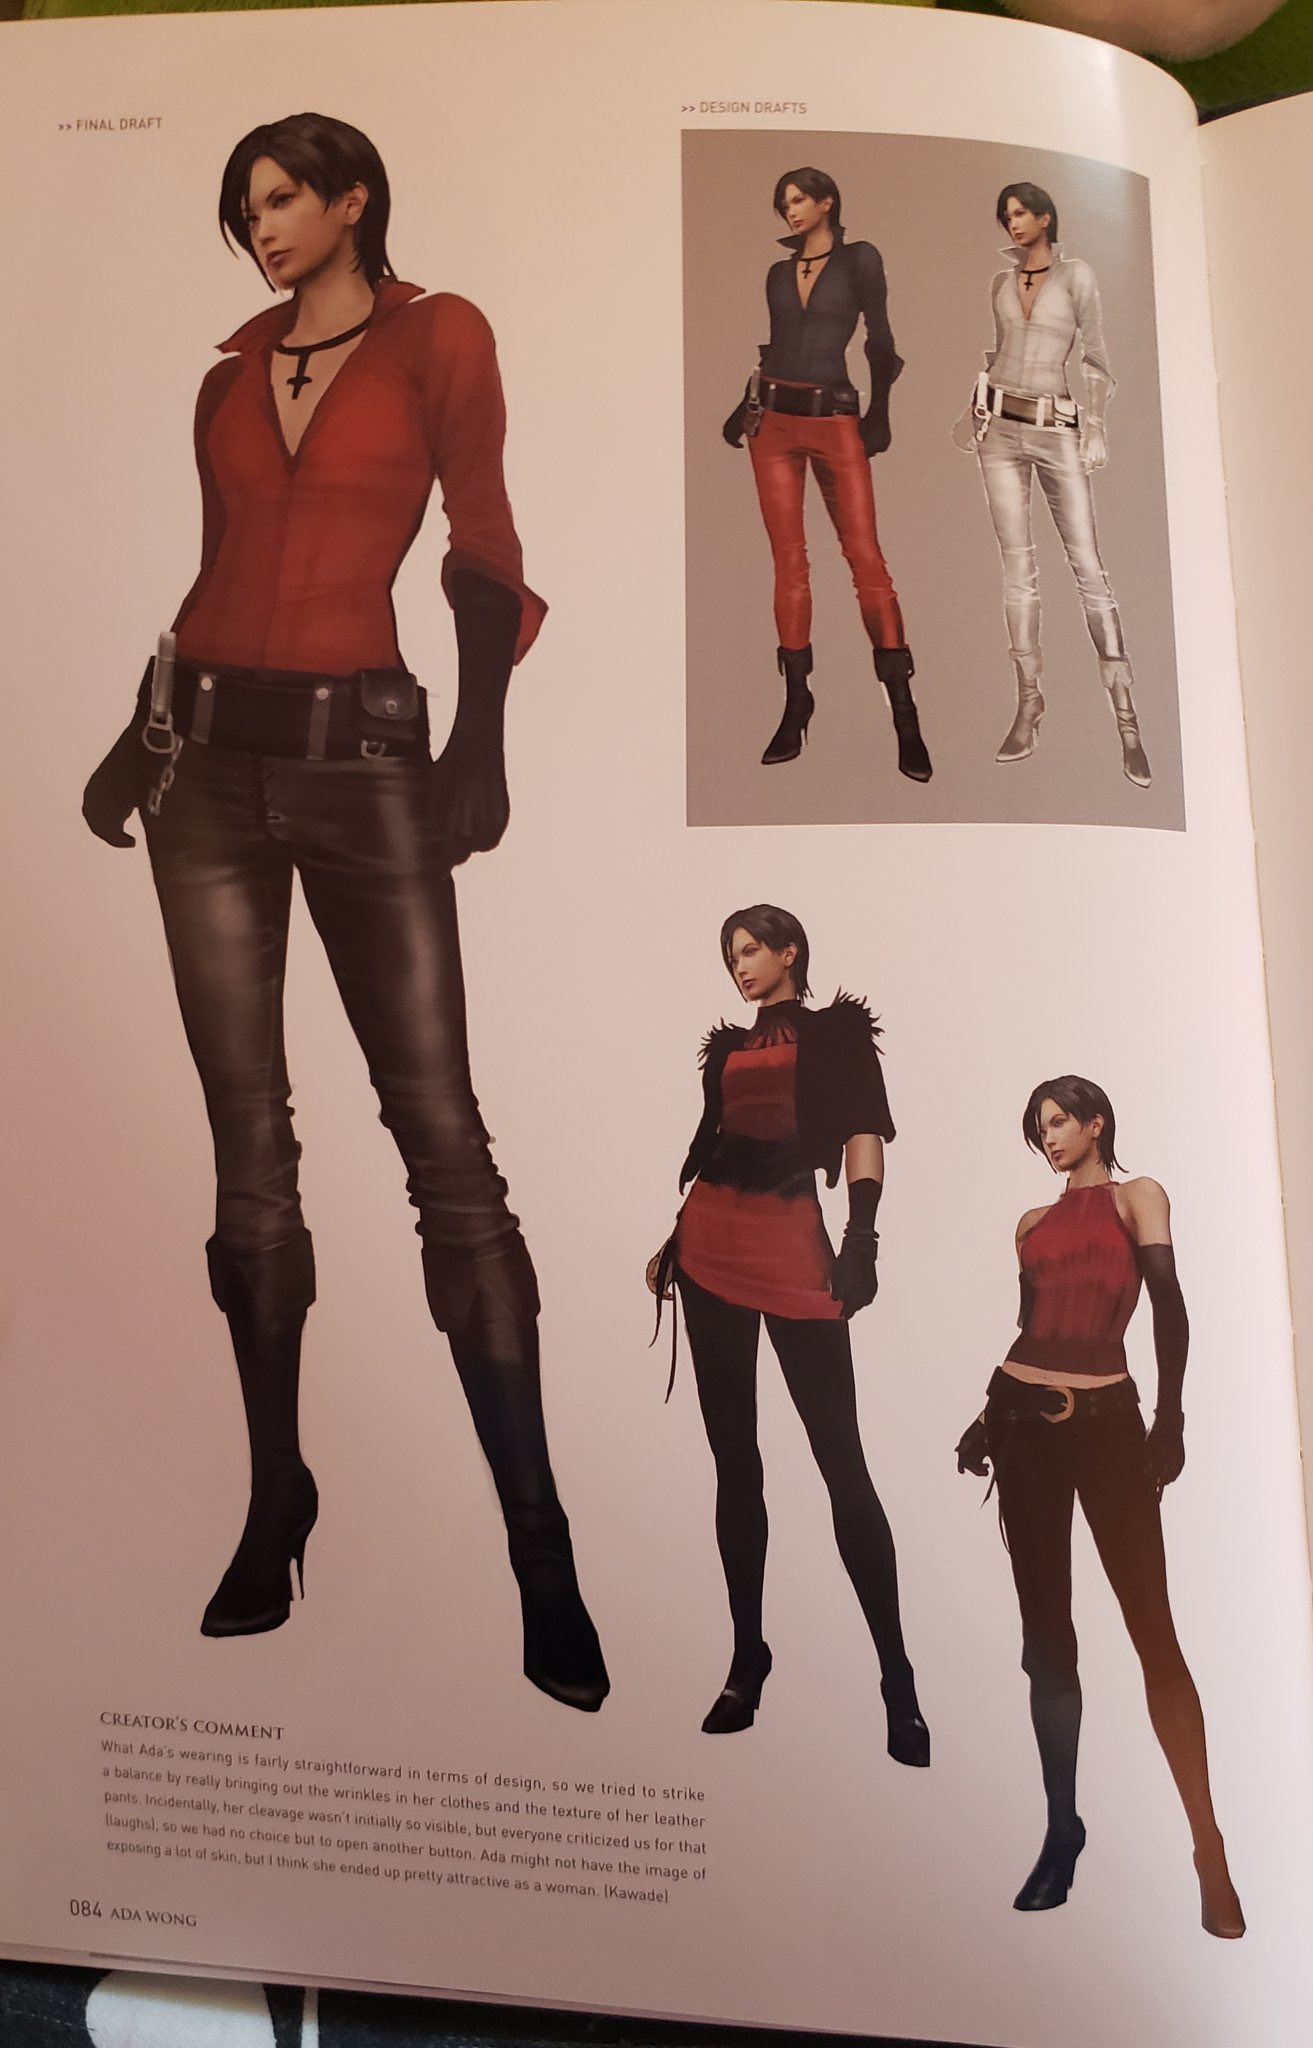 Games Concept Art and Pics on X: Ada Wong concept art from Resident Evil 6.  #ResidentEvil #ResidentEvil6 #AdaWong #ConceptArt #GamesConceptArt   / X